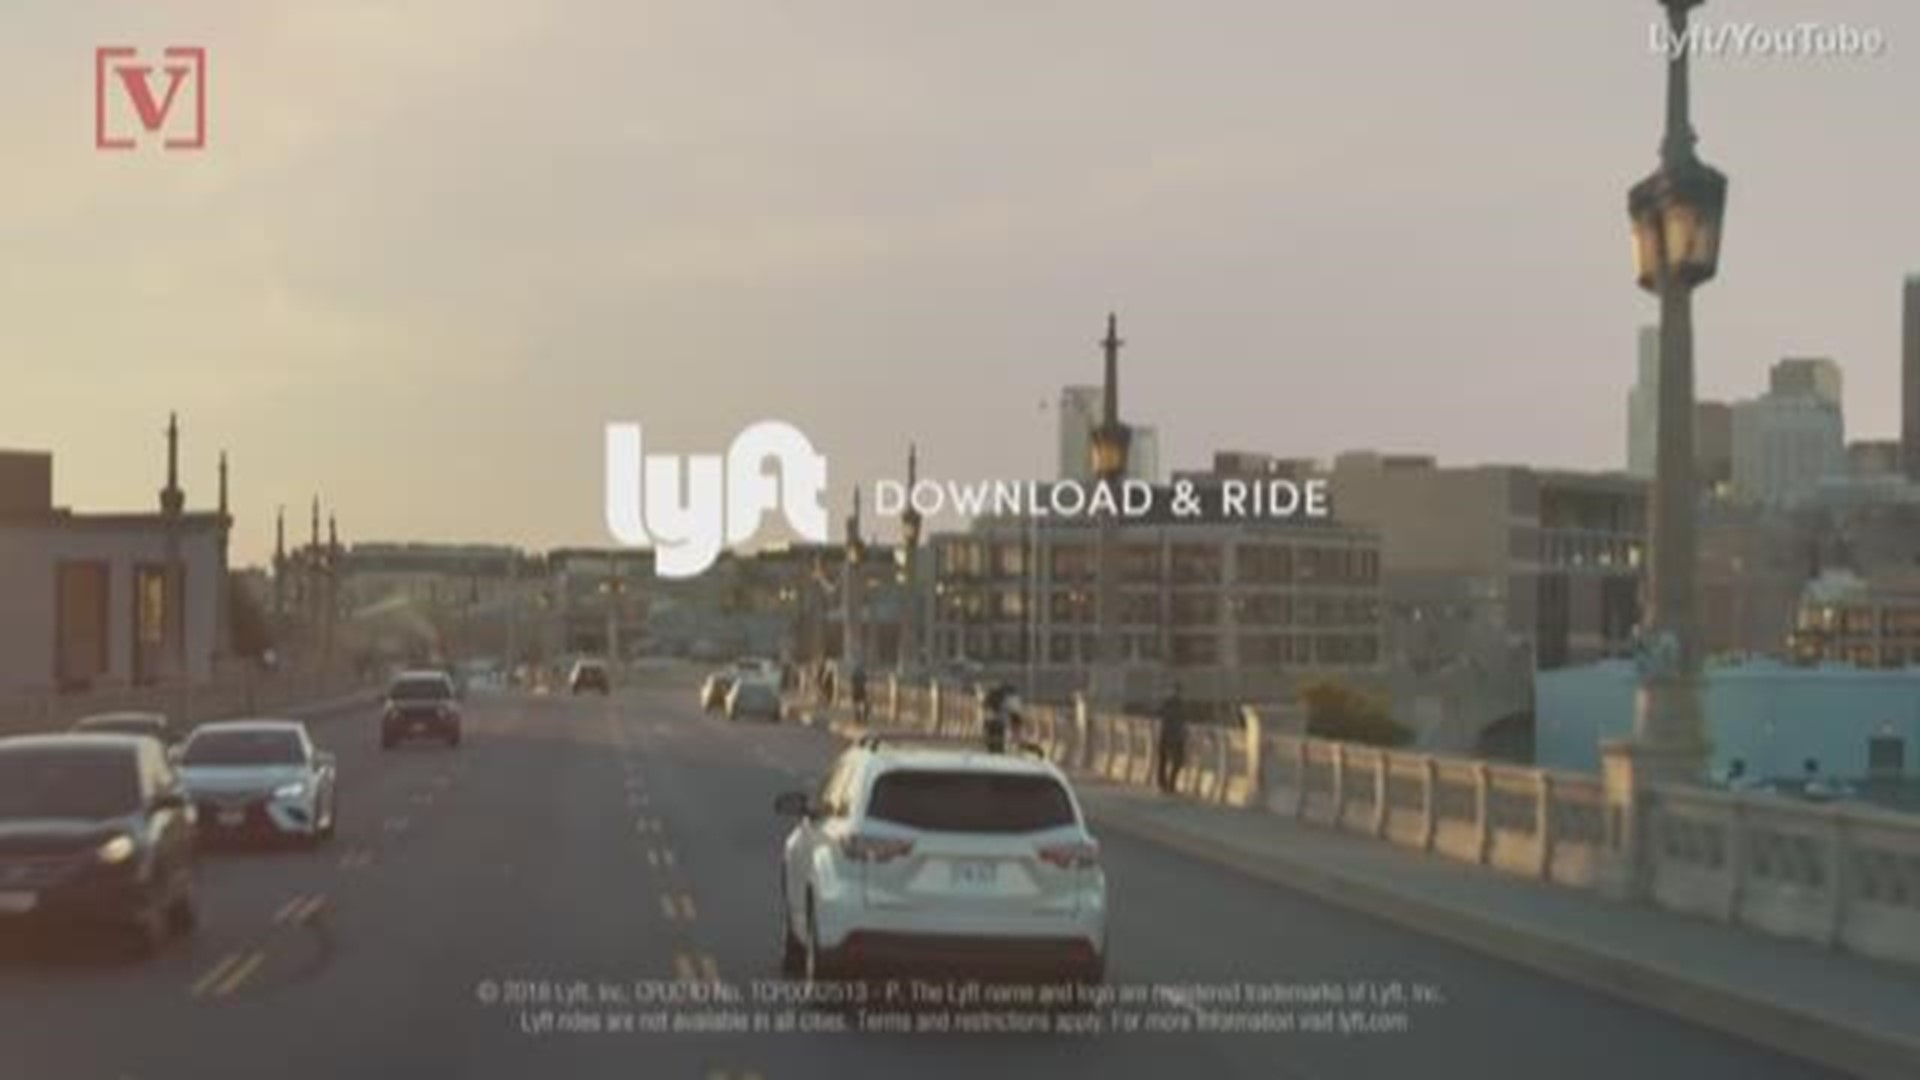 Lyft is helping out families in need with a new initiative called the Grocery Access Program.  Qualified families can use up to 50 rides and pay just $2.50 both ways to and from the nearest supermarket in their neighborhood.